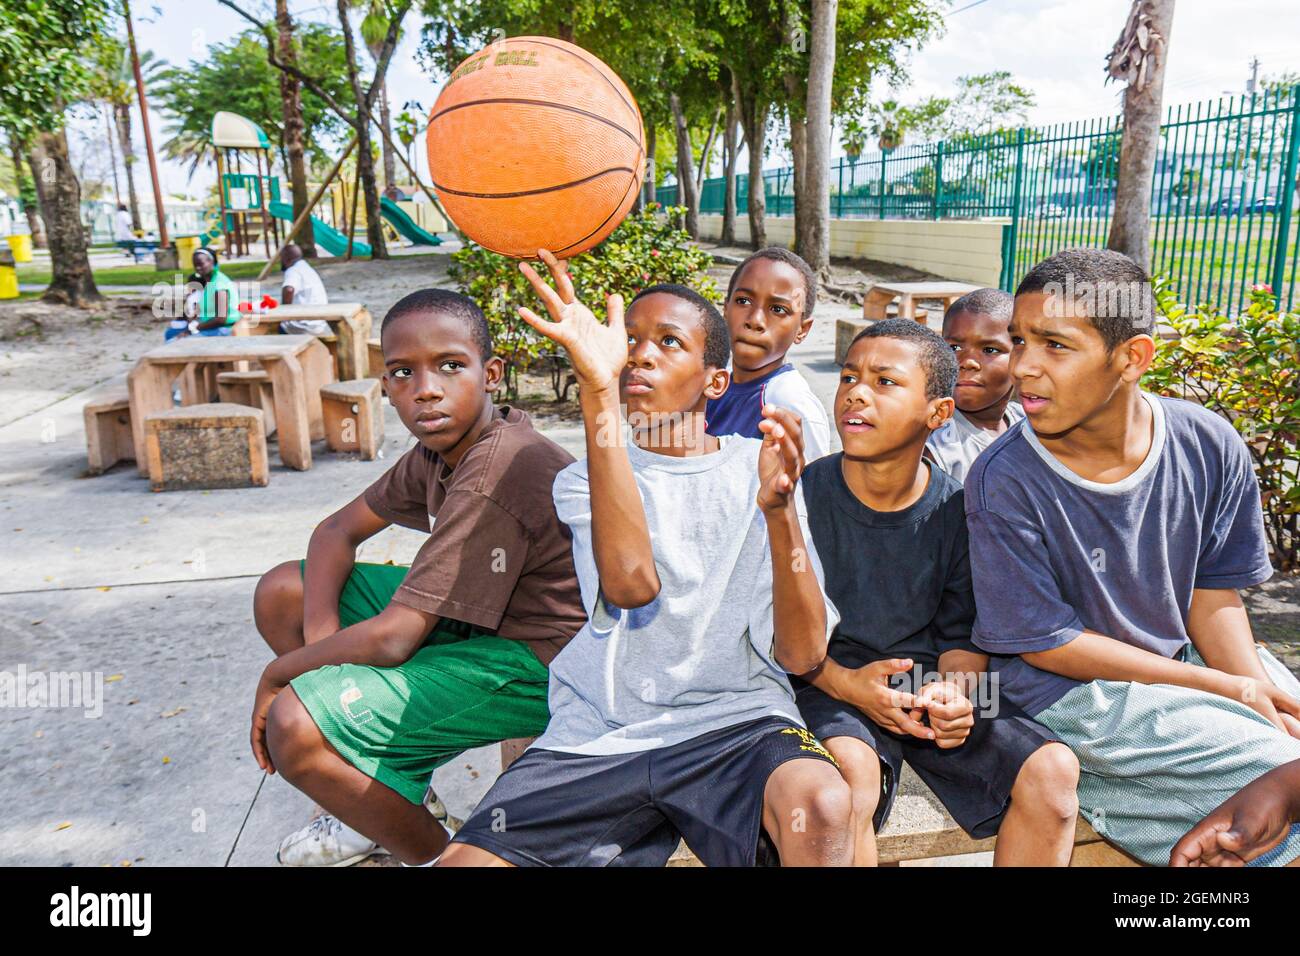 Miami Florida,Liberty City African Square Park inner city,Black boys male kids children group friends playground,showing off basketball balancing spin Stock Photo